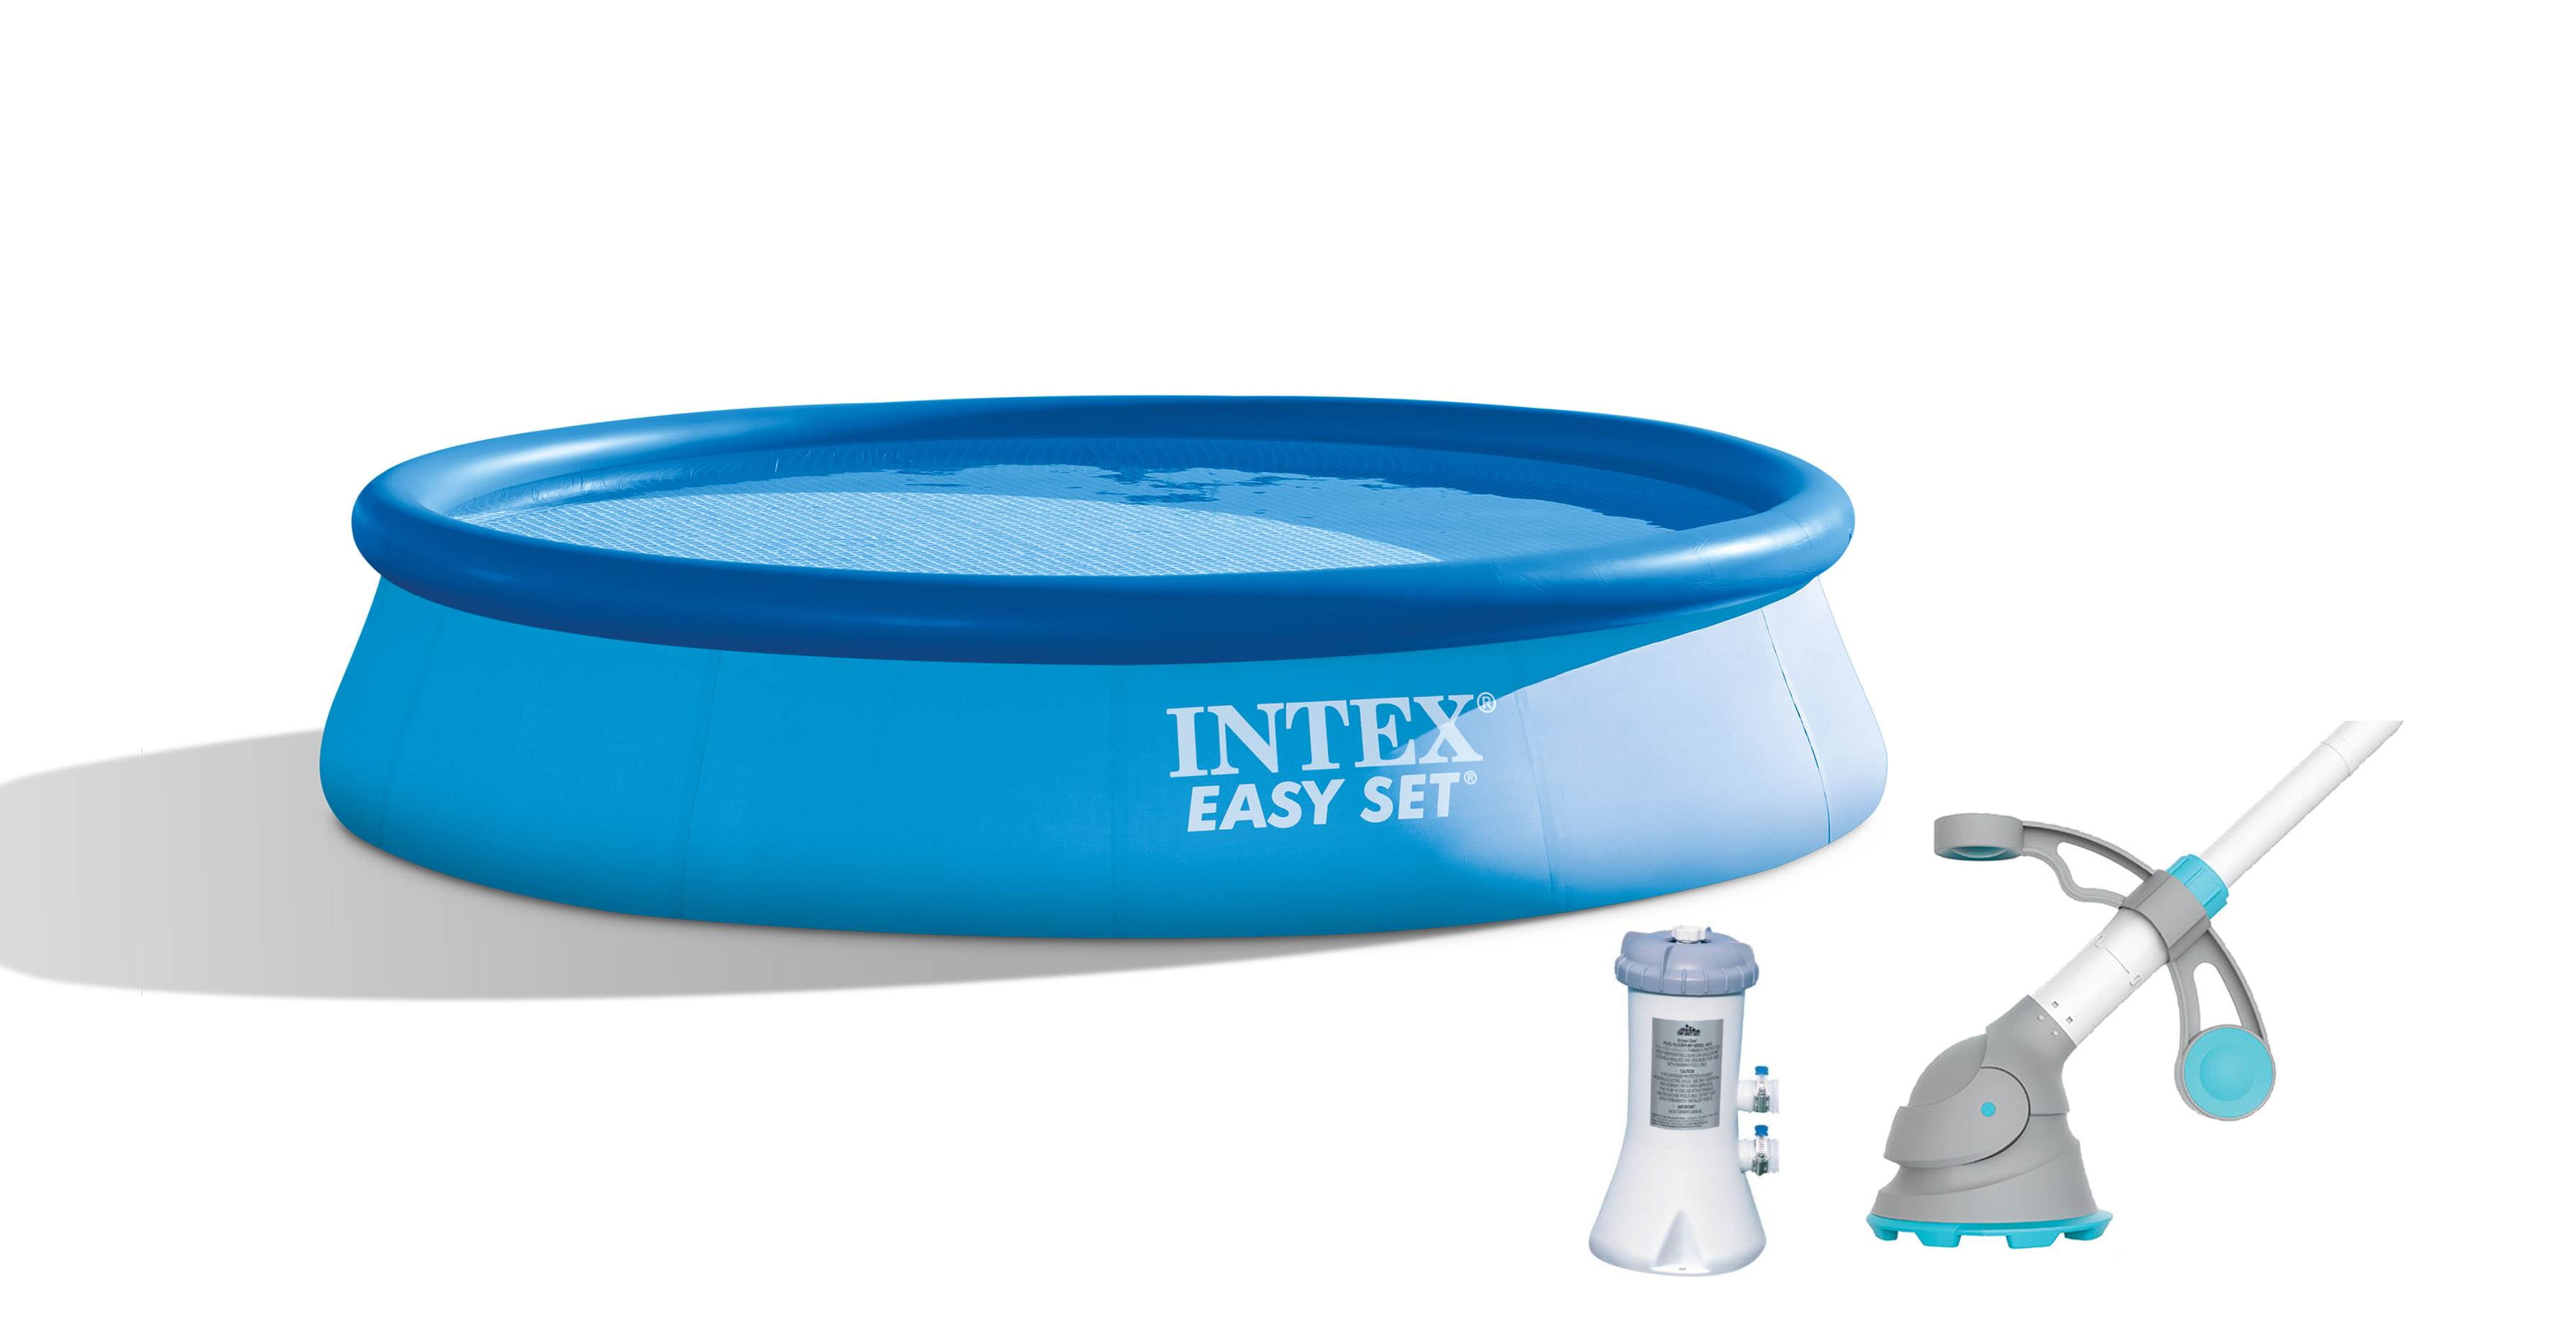 Intex 8ft,12ft,15ft X 30in/48in Easy Set Swimming Pool Set with Filter Pump 